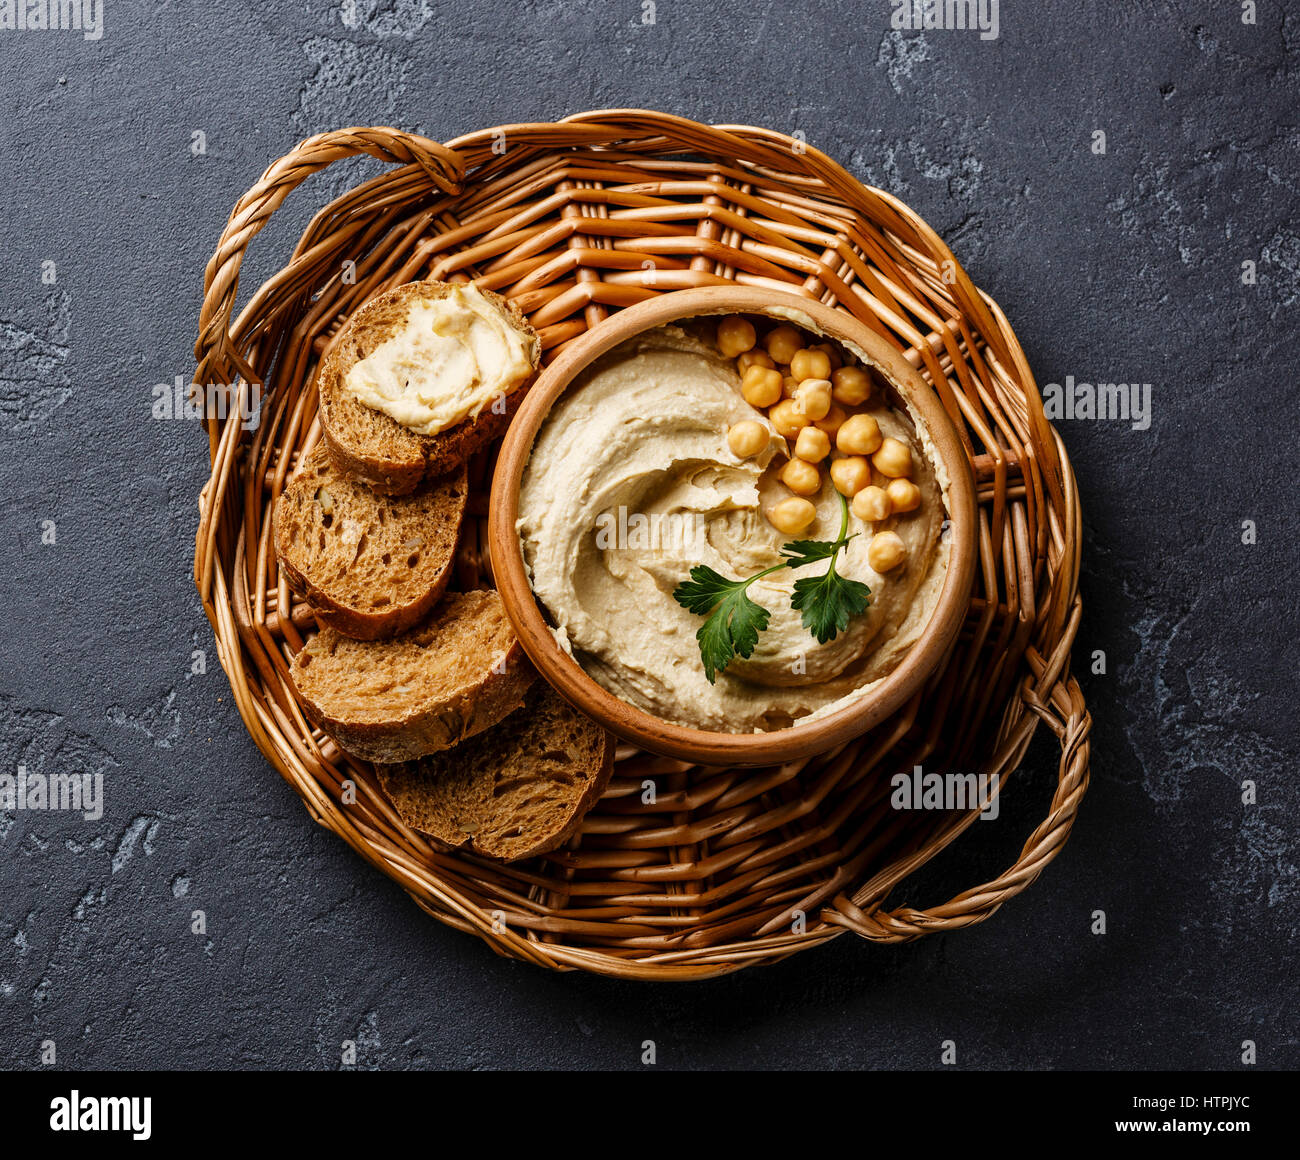 Homemade hummus and bread on wicker tray on black stone background Stock Photo